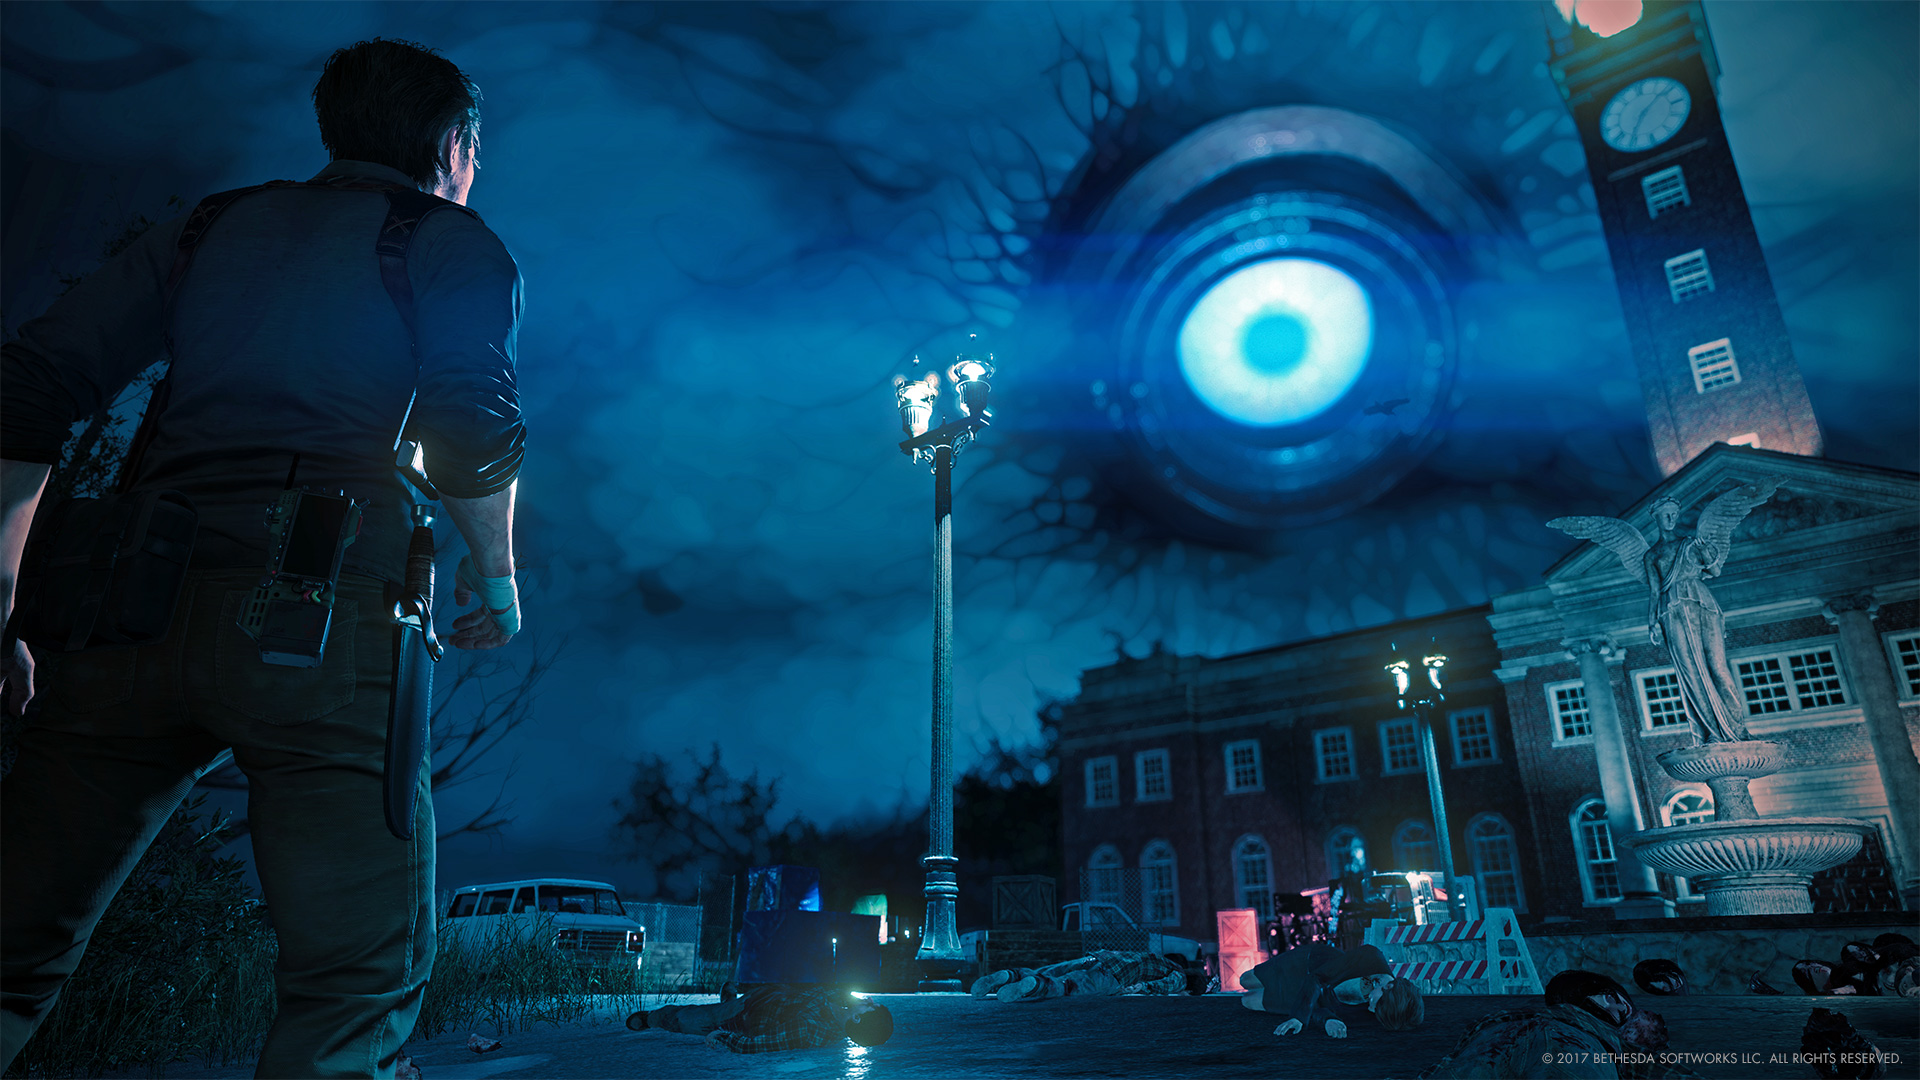 best horror games – The Evil Within 2 character looking towards a large eye in the sky floating above a building